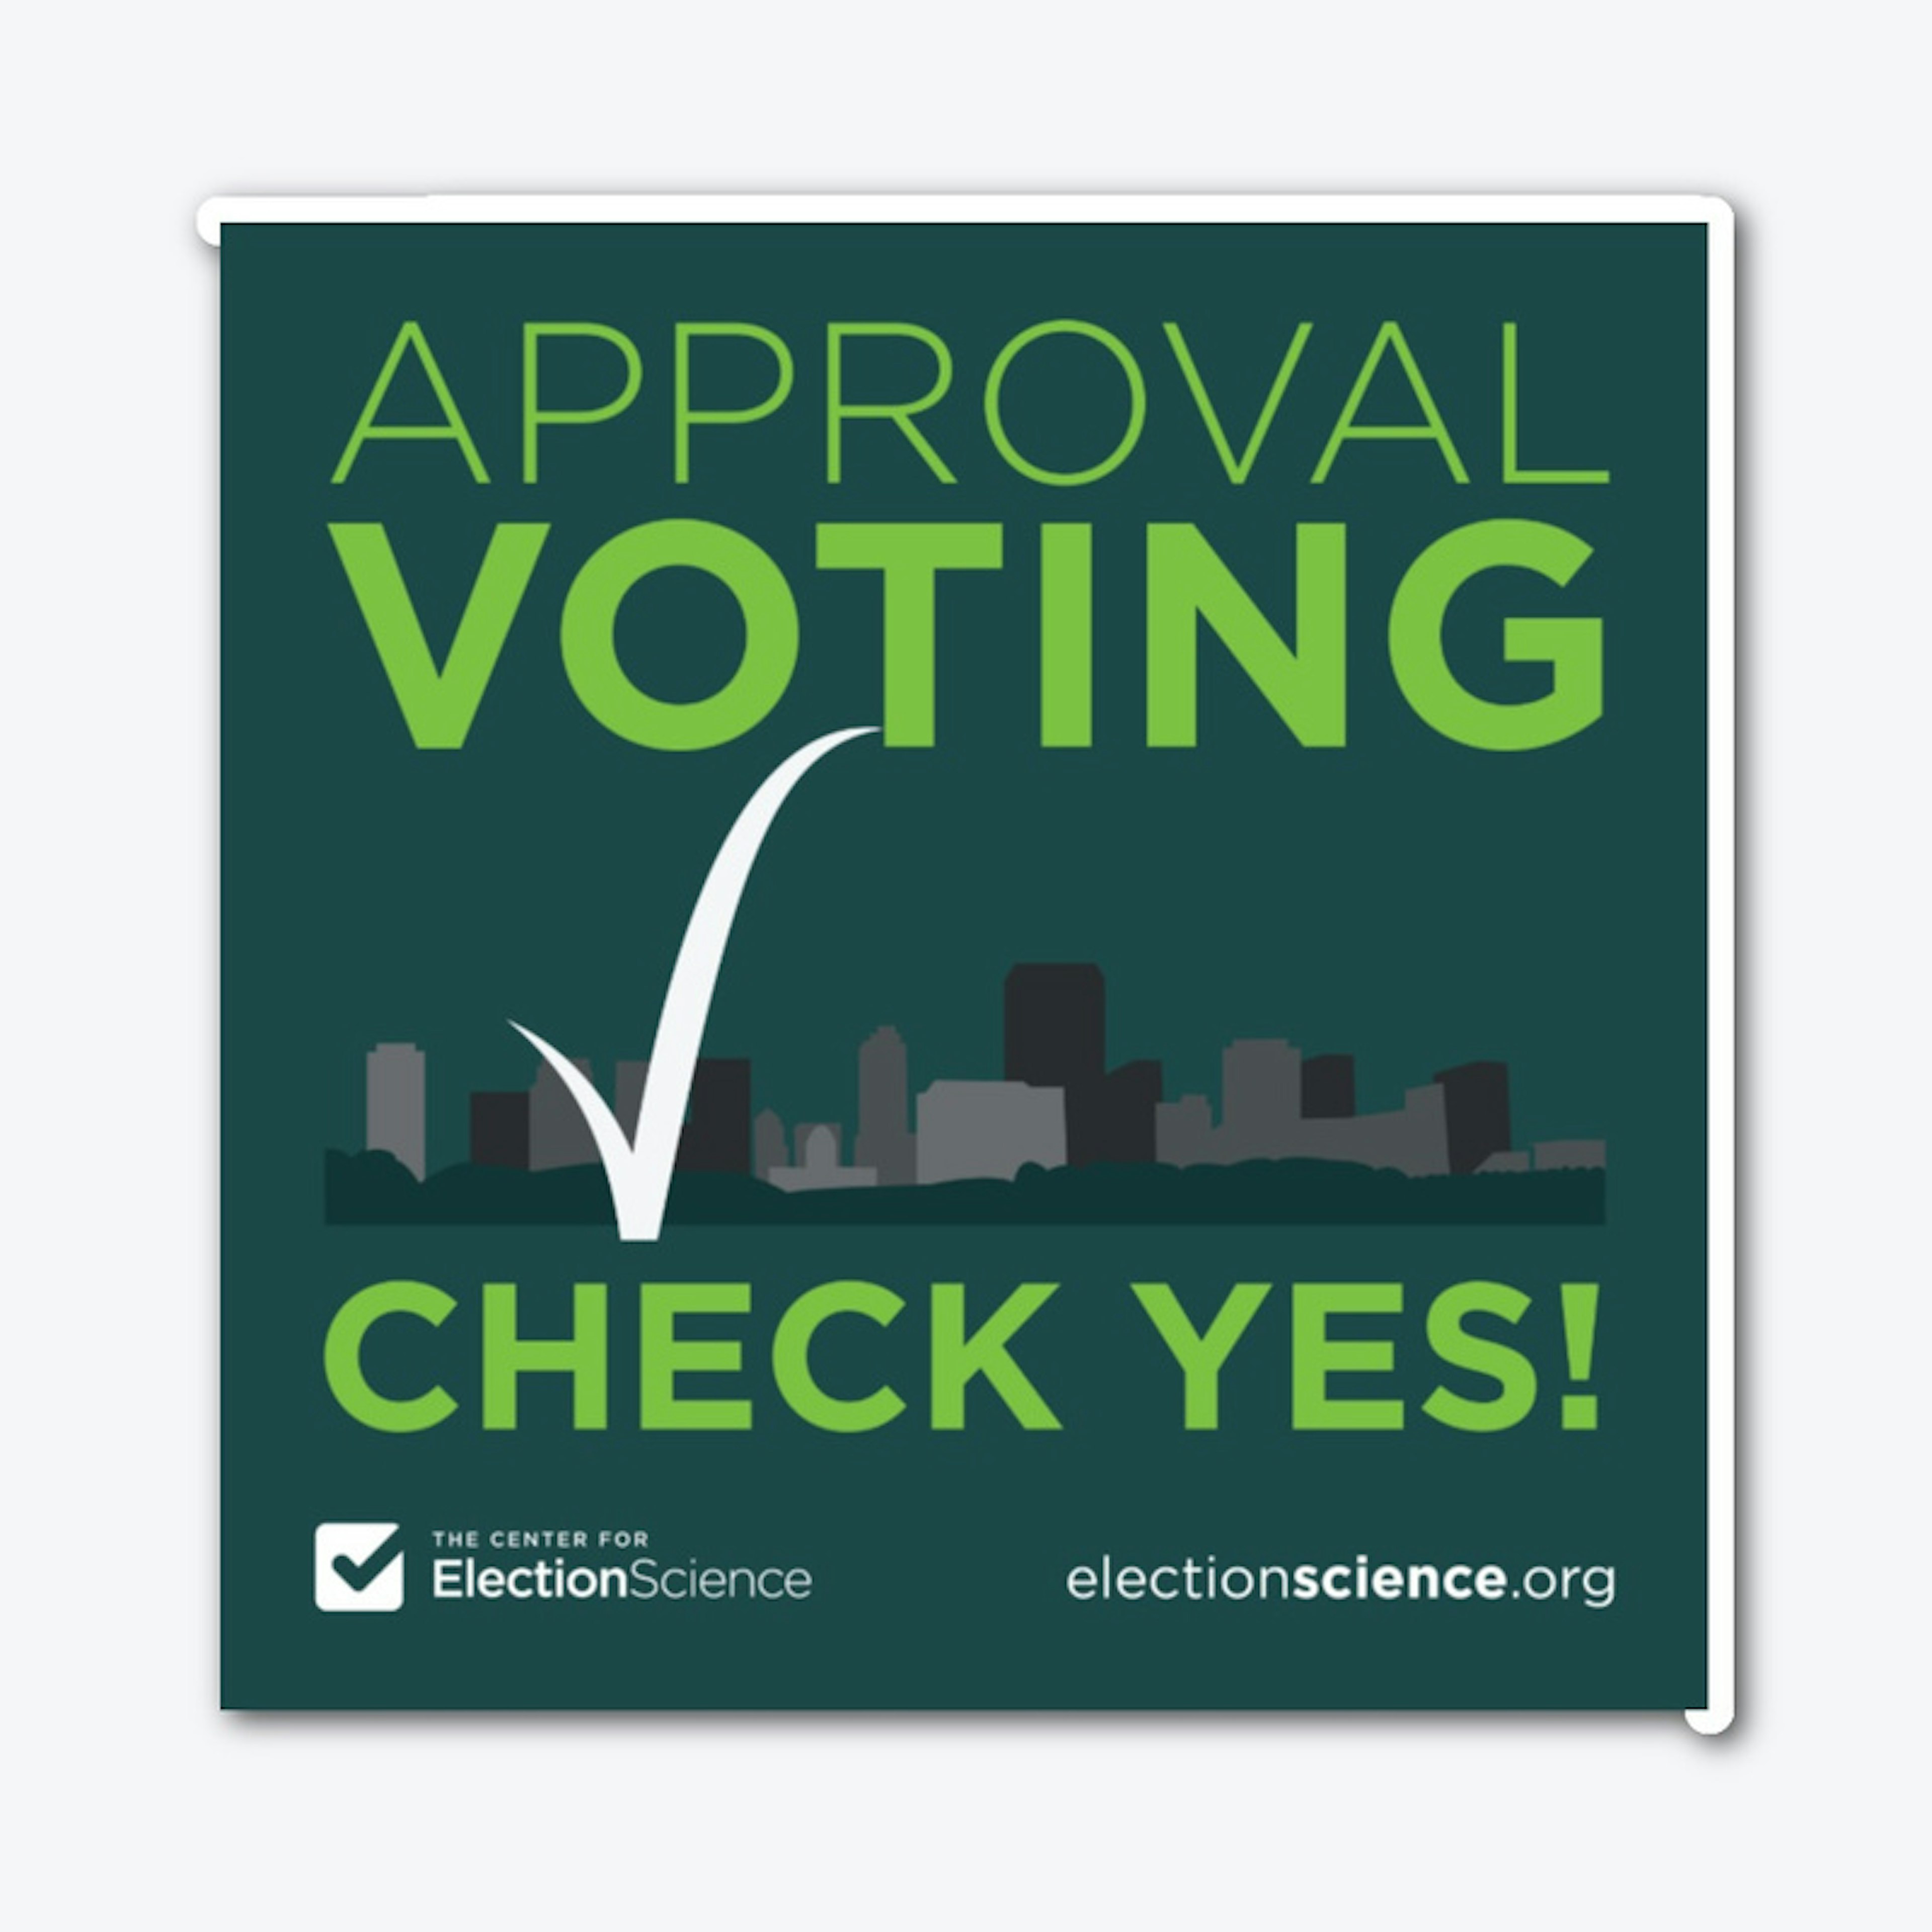 Check Yes! for Approval Stickers